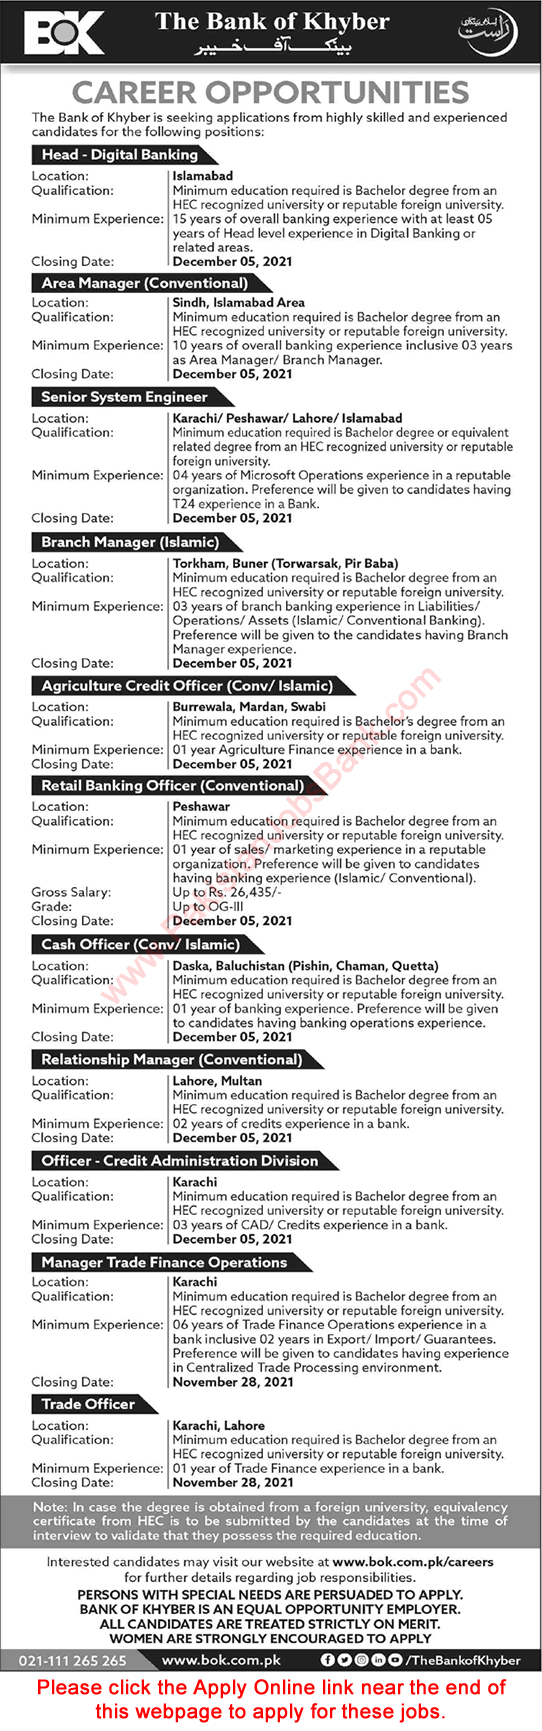 Bank of Khyber Jobs November 2021 Apply Online Cash Officers, System Engineers & Others BOK Latest